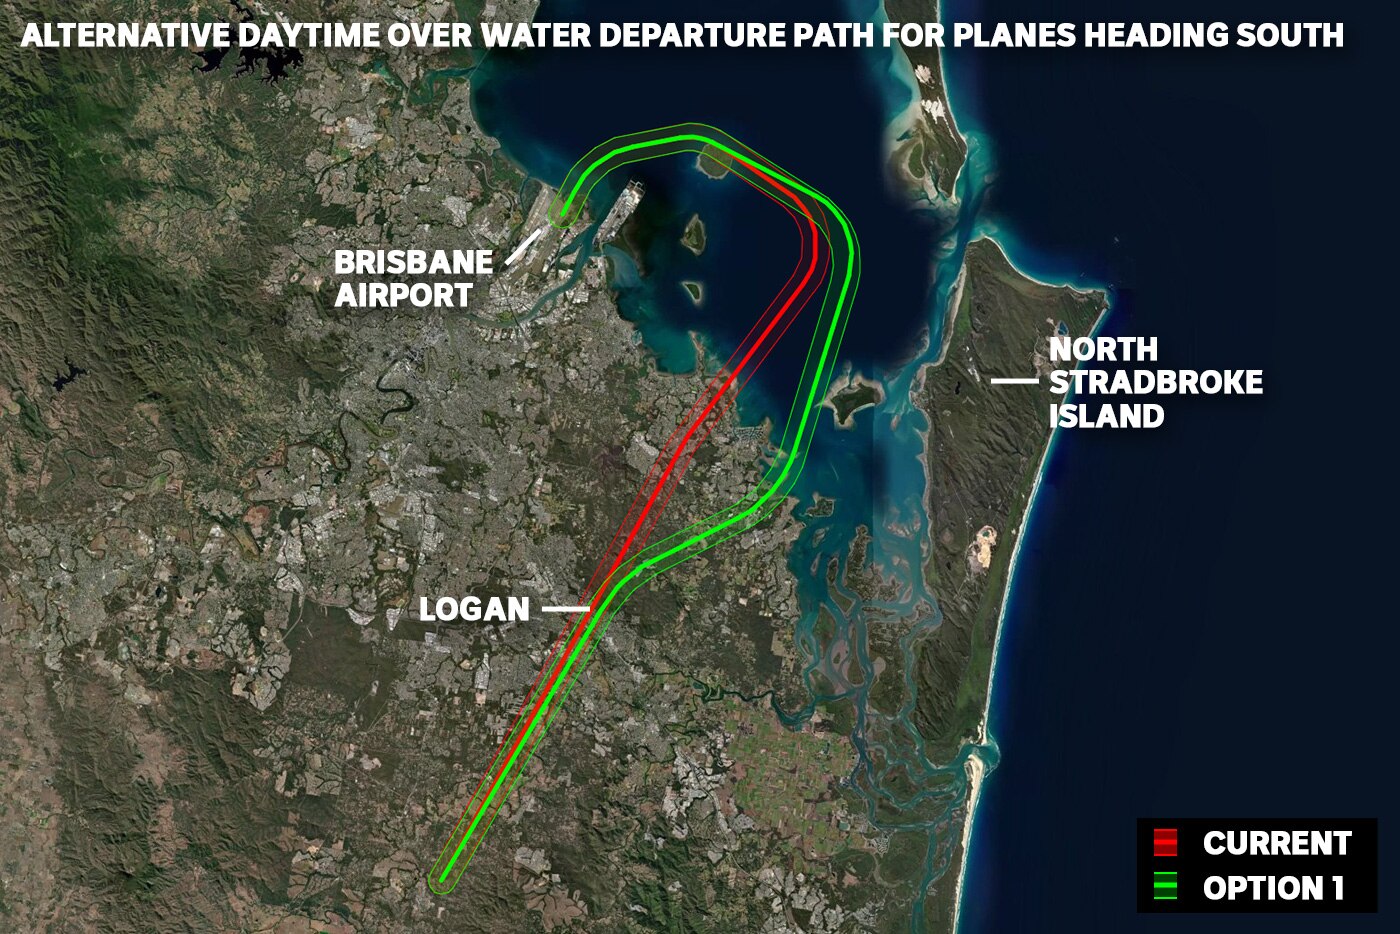 Alternative day-time over water departure path for planes heading south